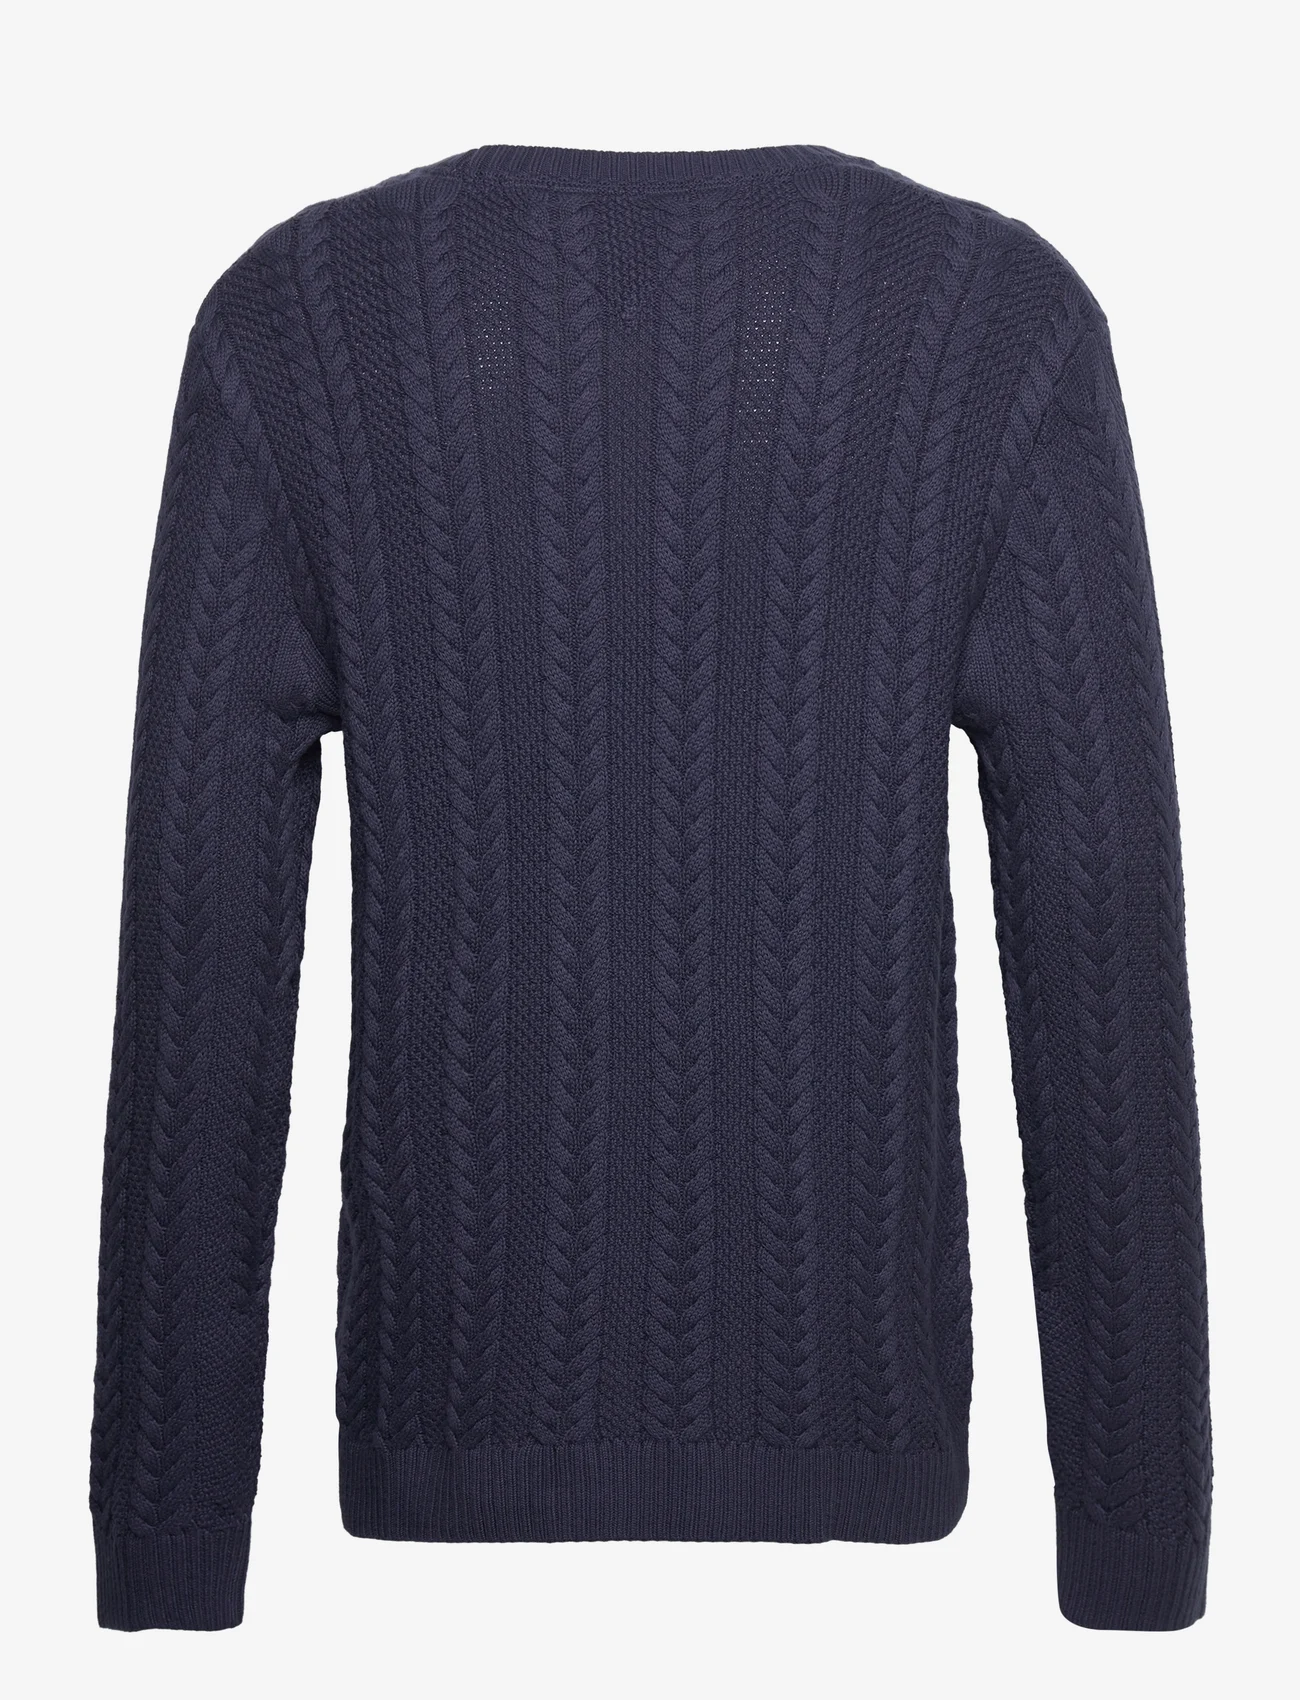 Tommy Jeans - TJM REG CABLE SWEATER - knitted round necks - twilight navy - 1